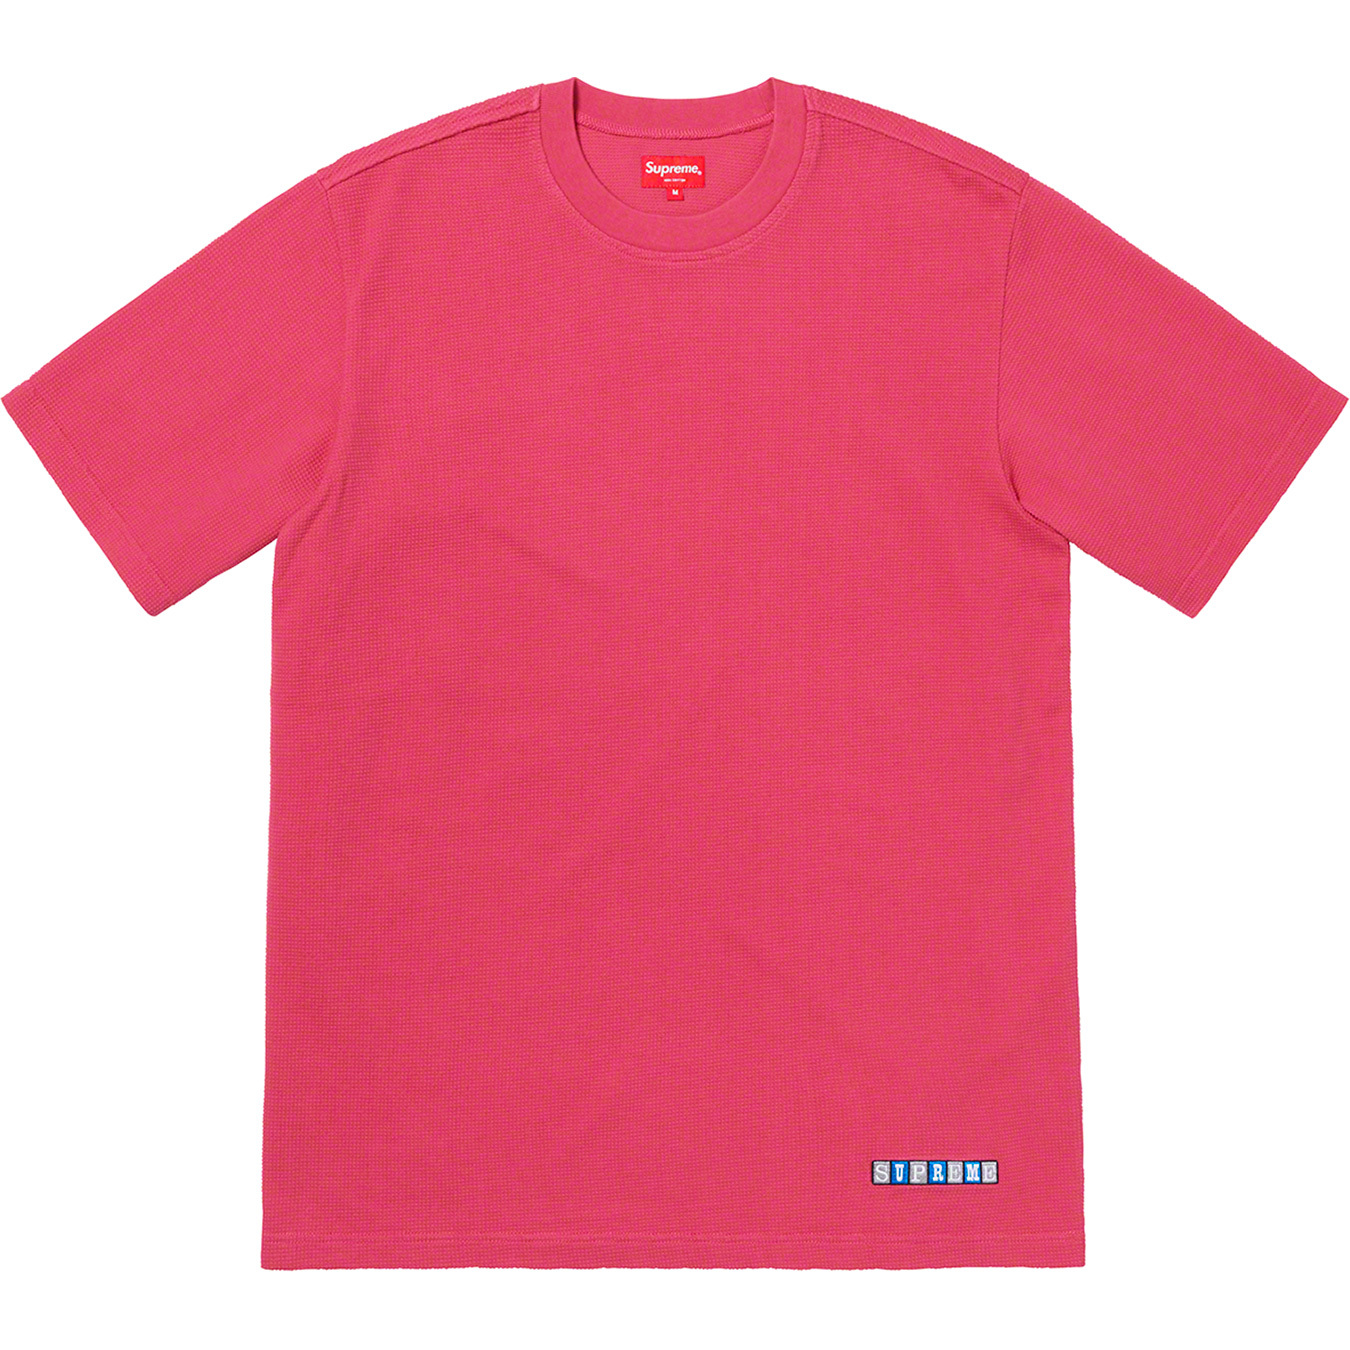 Supreme 19ss Waffle S/S Top Magenta S